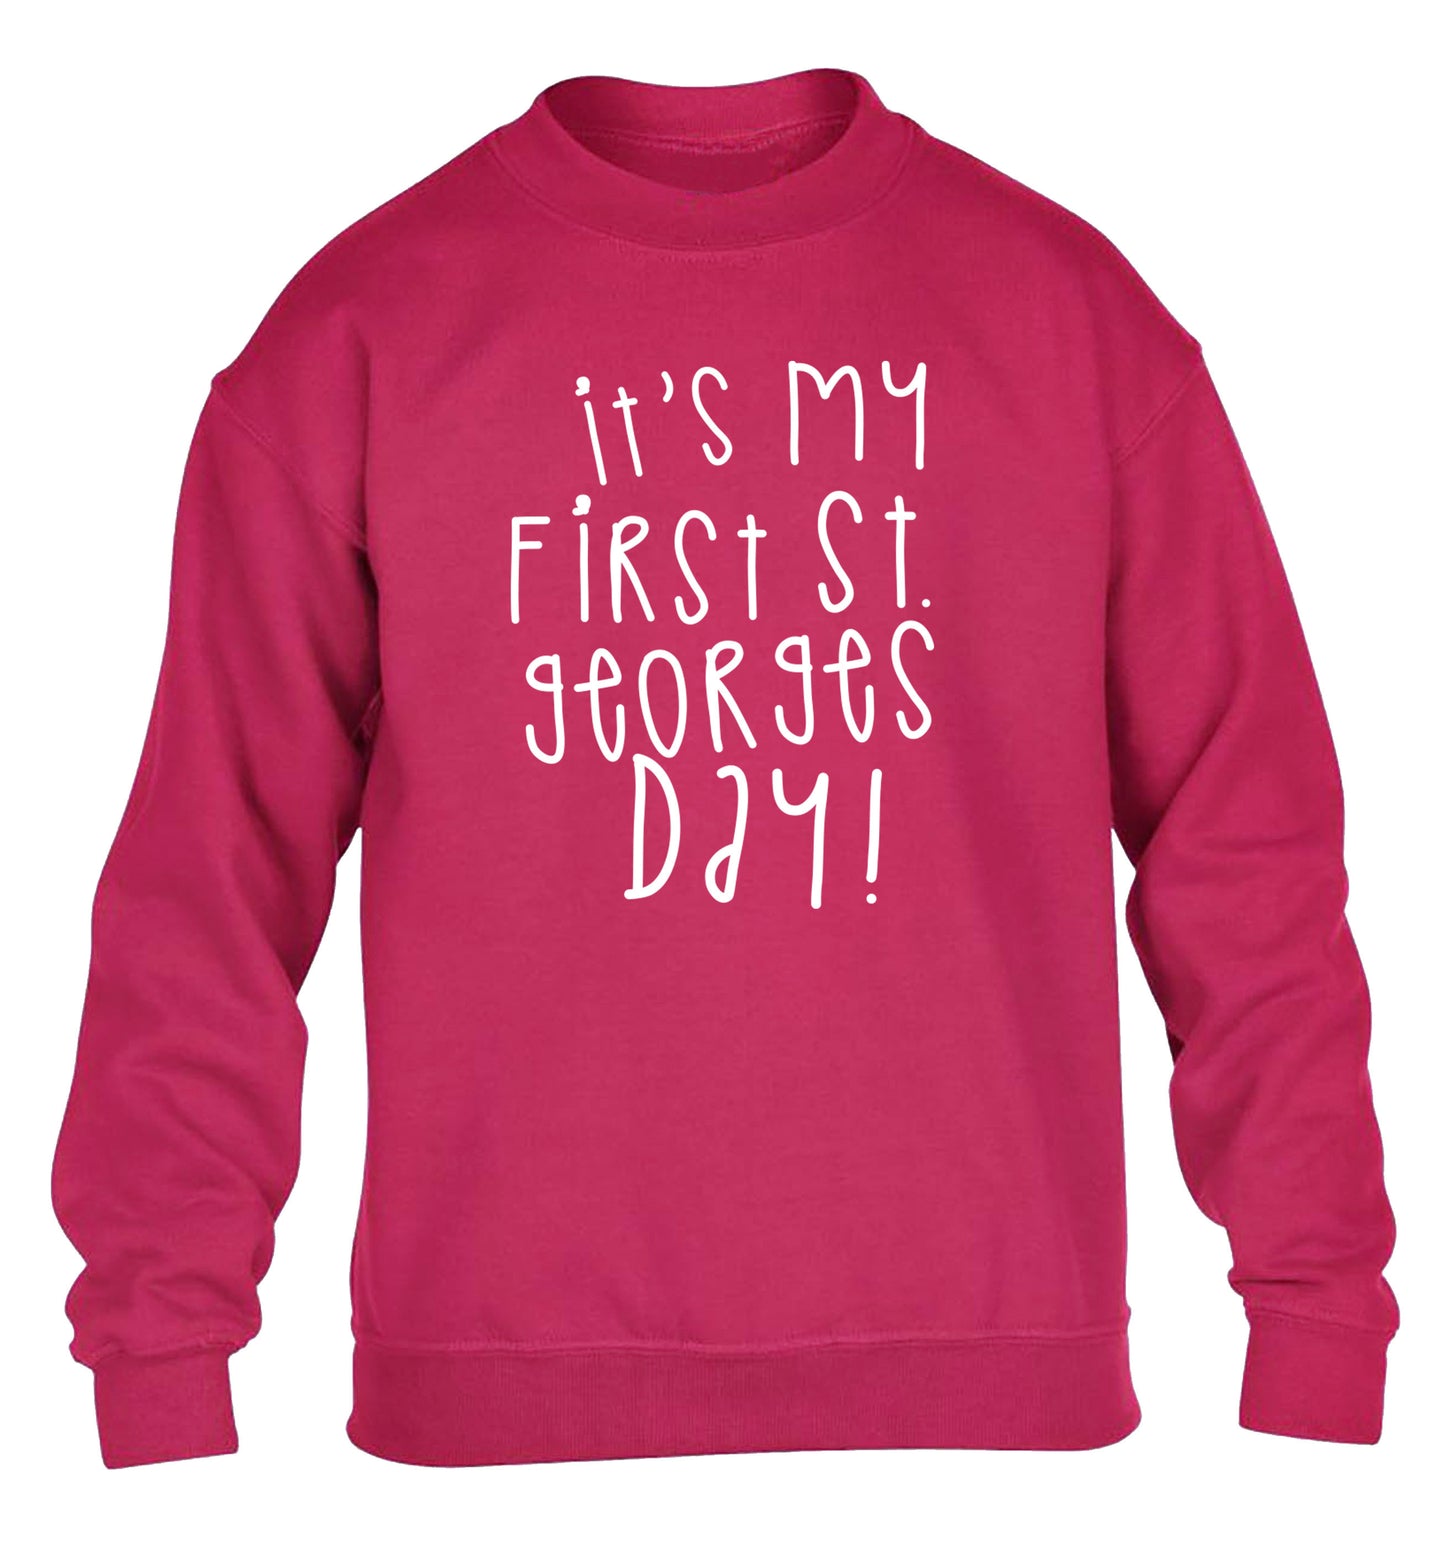 It's my first St Georges day children's pink sweater 12-14 Years